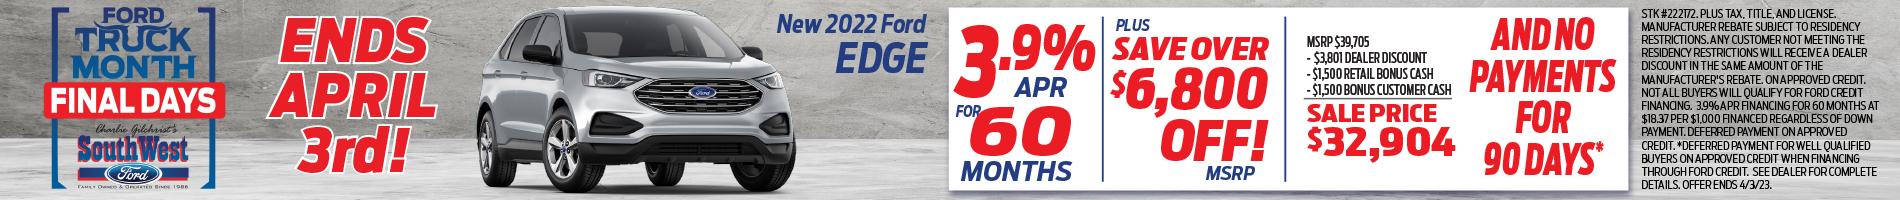 2022 Edge - 3.9% APR for 60 Months